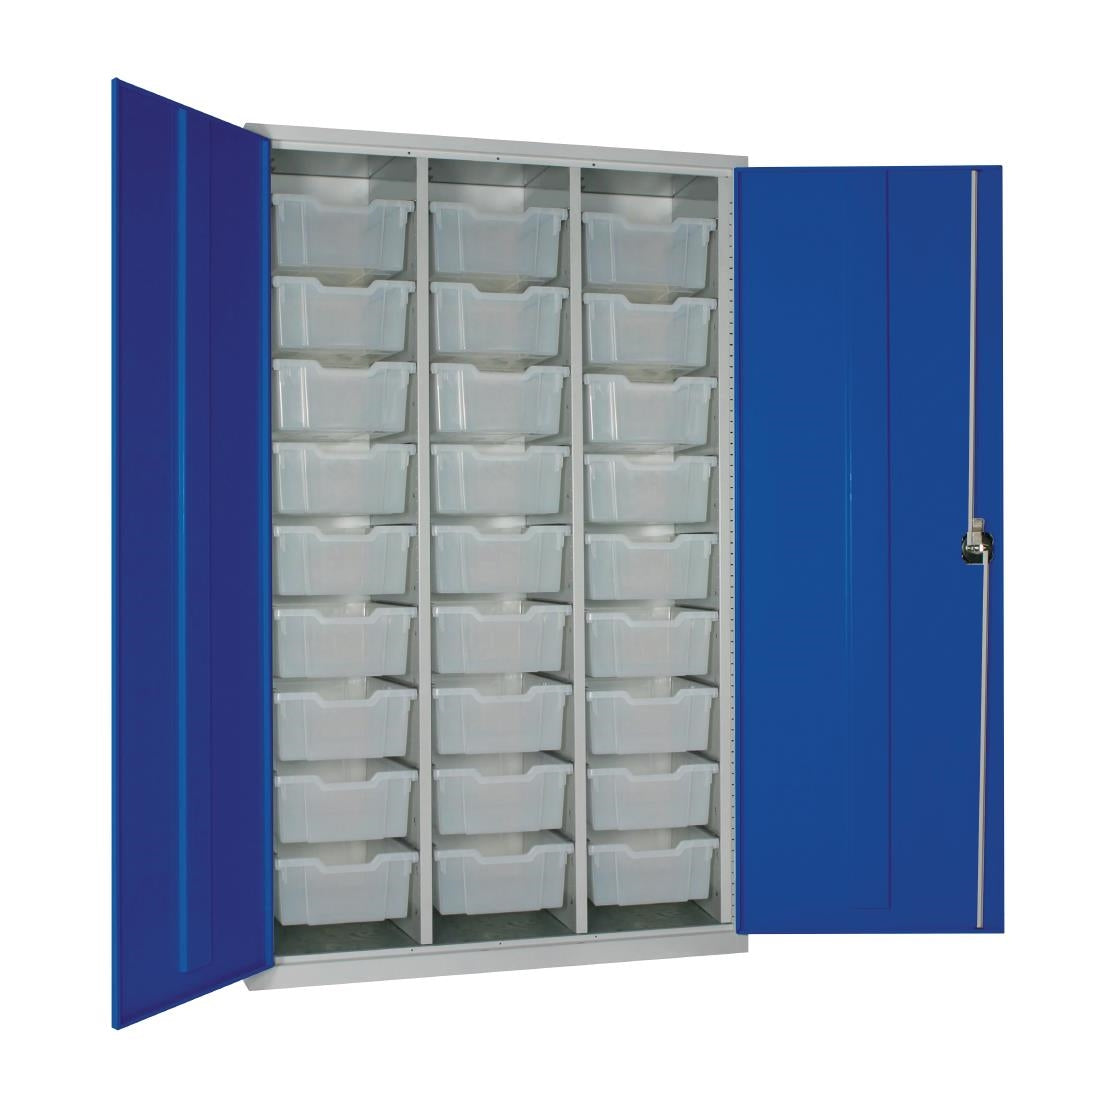 27 Tray High-Capacity Storage Cupboard - Blue with Transparent Trays